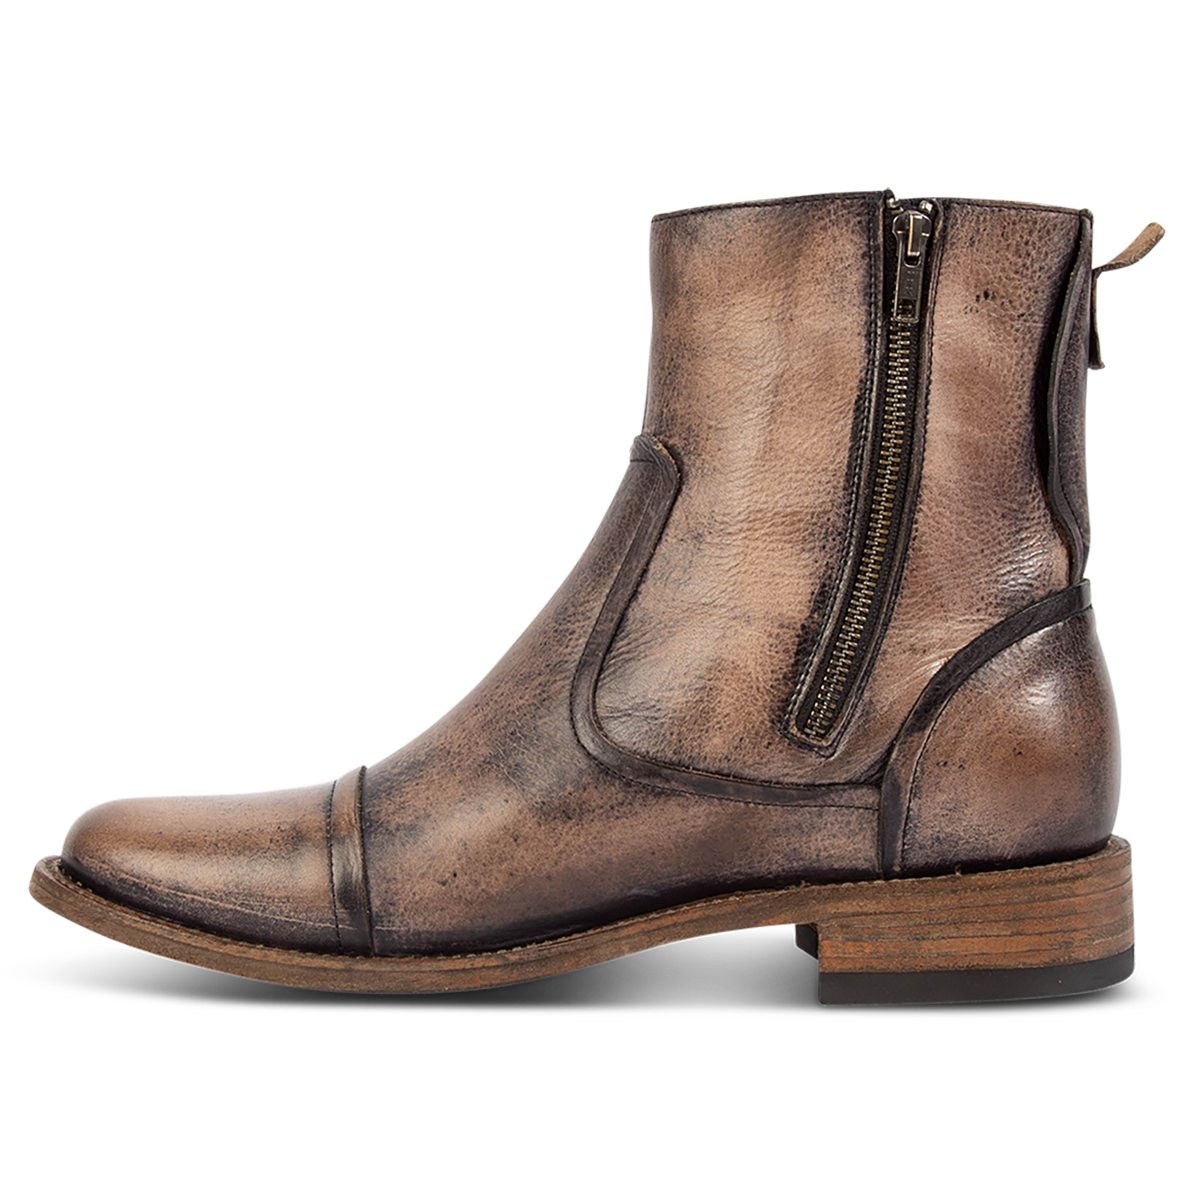 Side view showing inside working brass zip closure, low block heel and Goodyear welt on FREEBIRD men's Brooks black leather boot